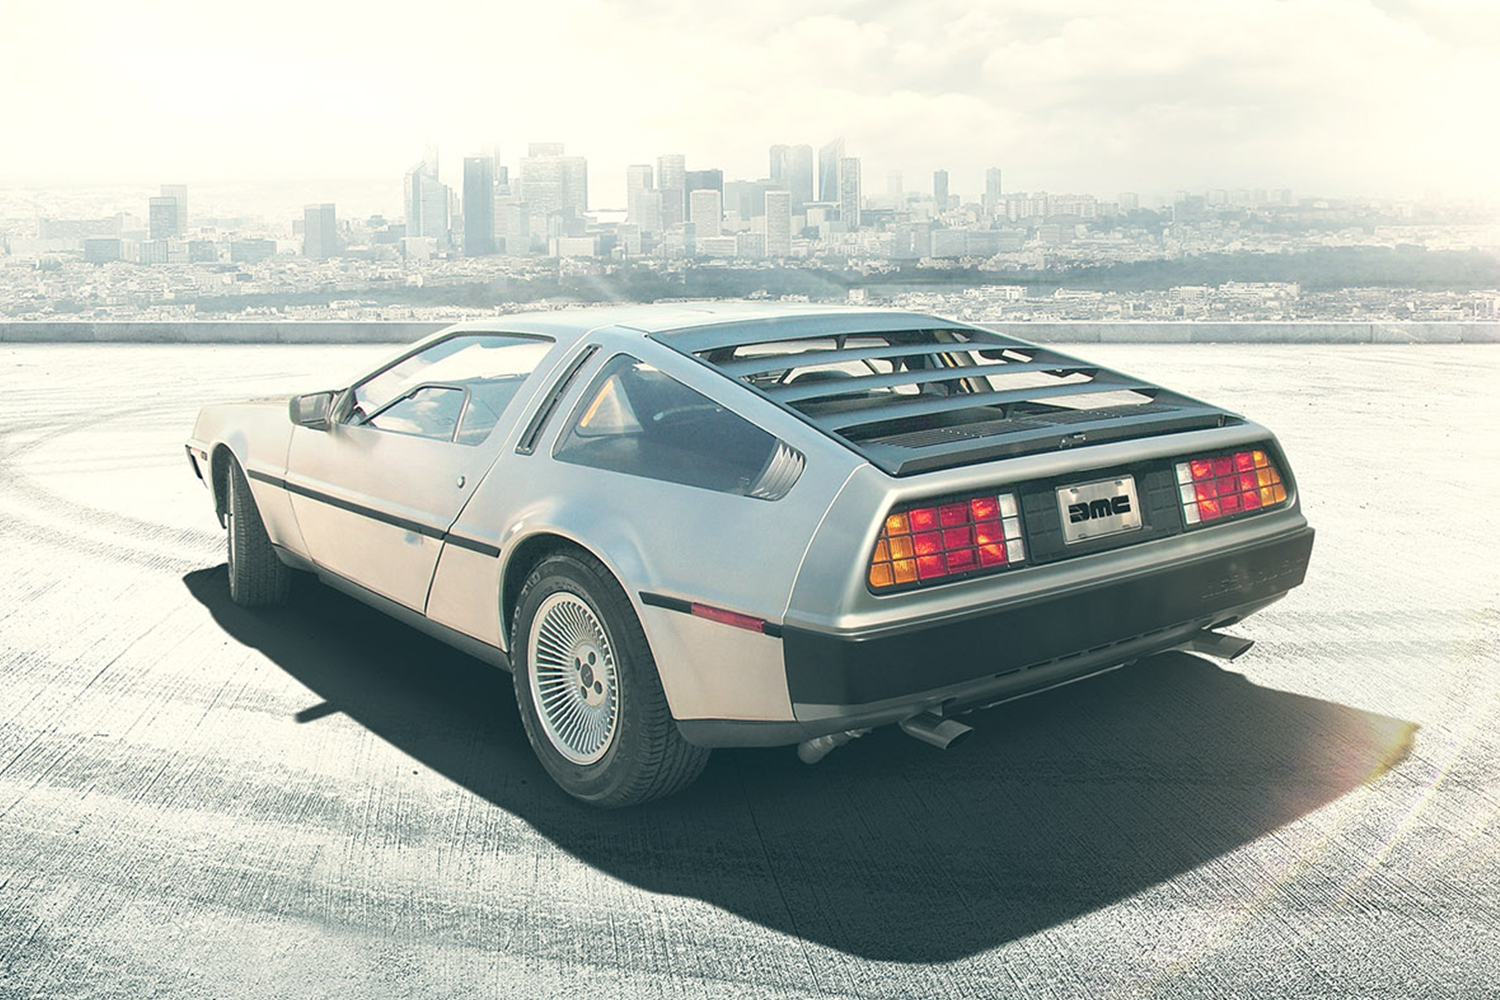 Delorean Is Preparing To Build And Sell Brand New Cars Insidehook